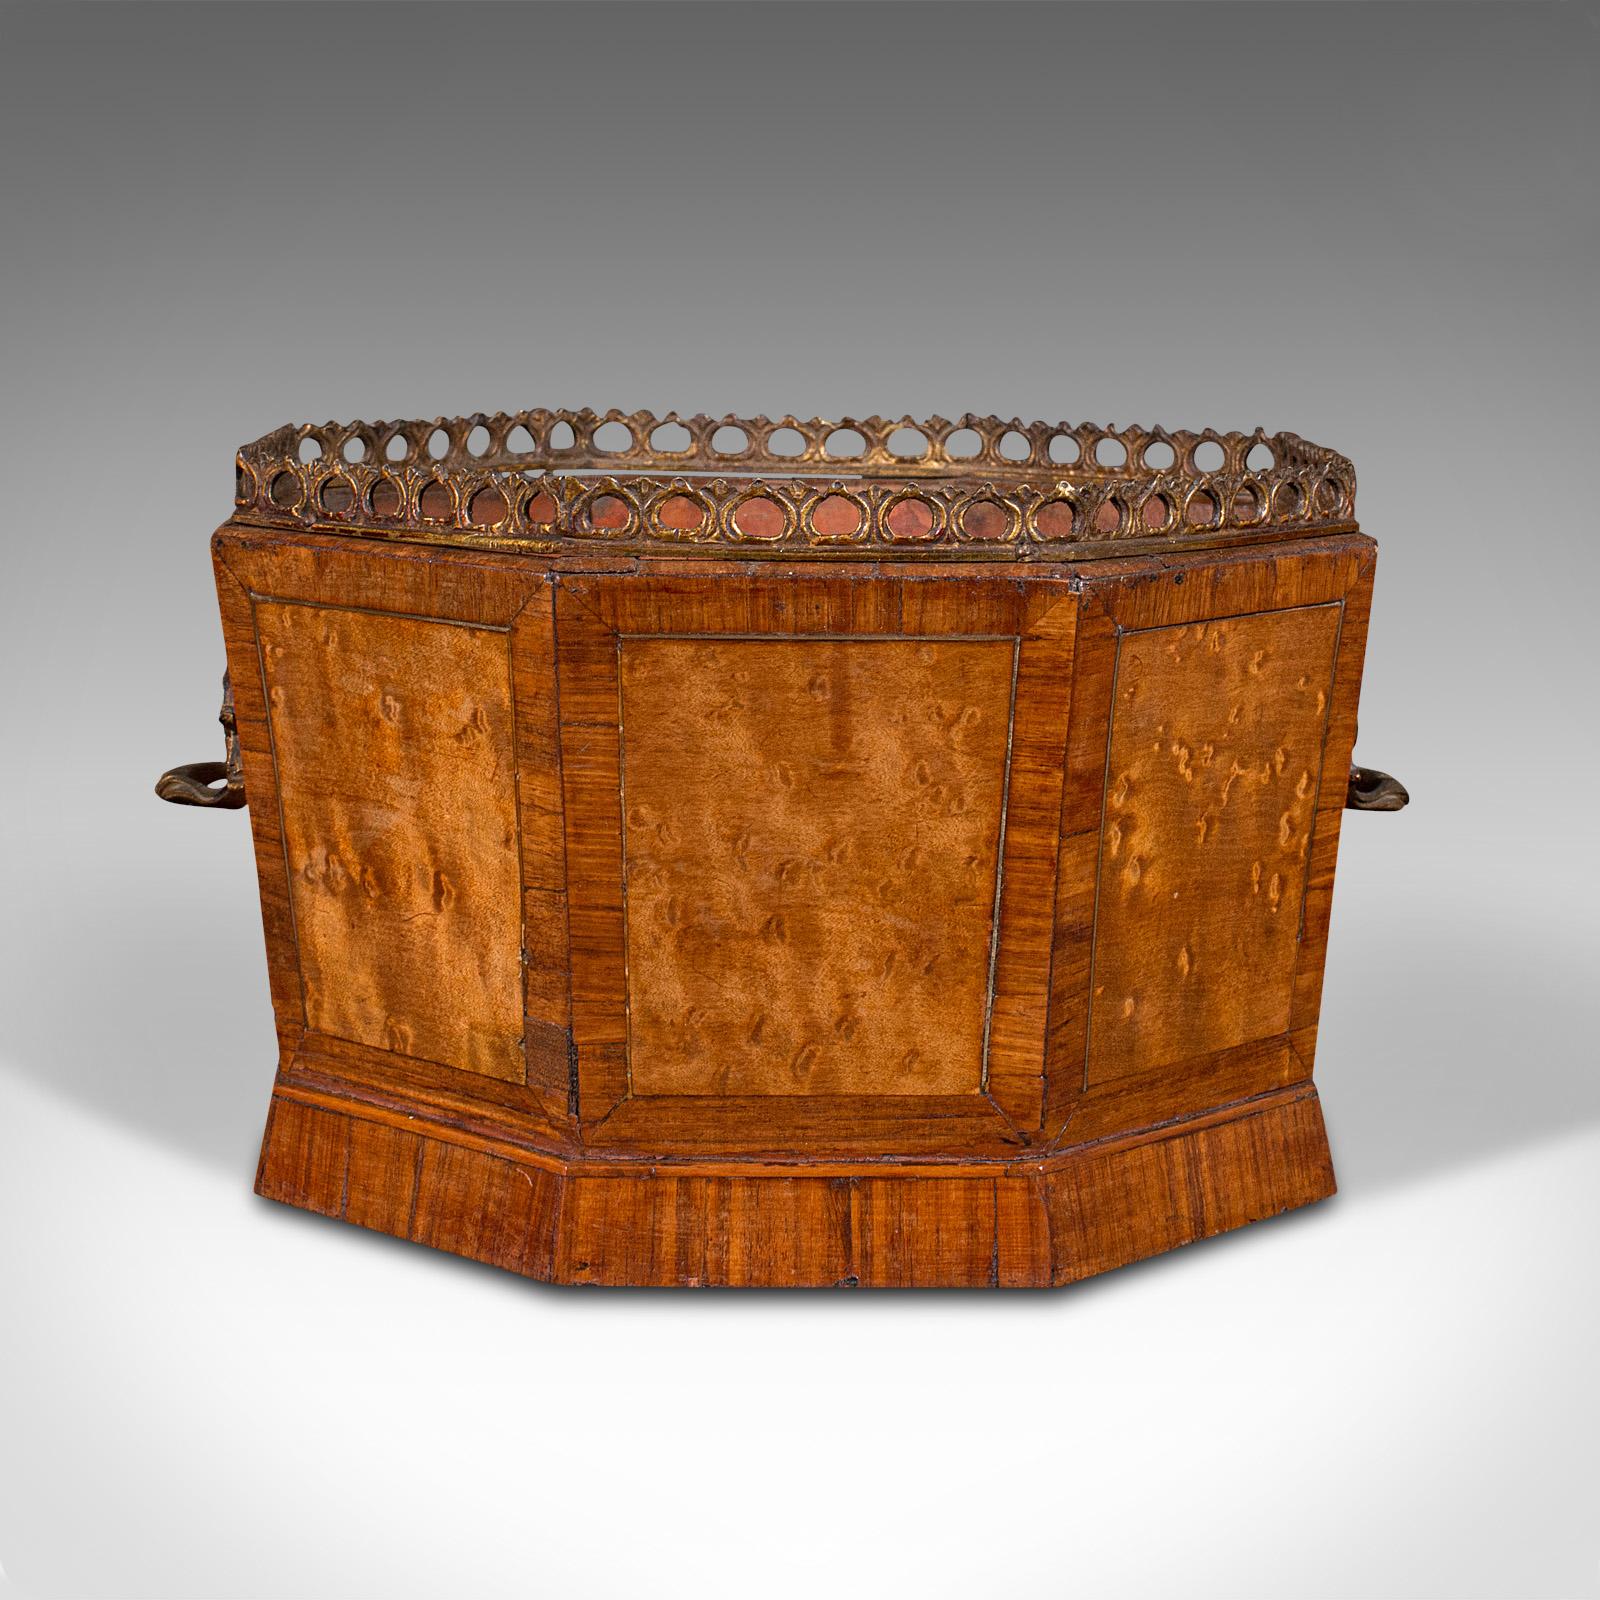 This is an antique decorative jardiniere. An English, bird's eye maple planter pot with octagonal form, dating to the Regency period, circa 1820.

Striking figuring and colour presents a fascinating appeal
Displays a desirable aged patina and in